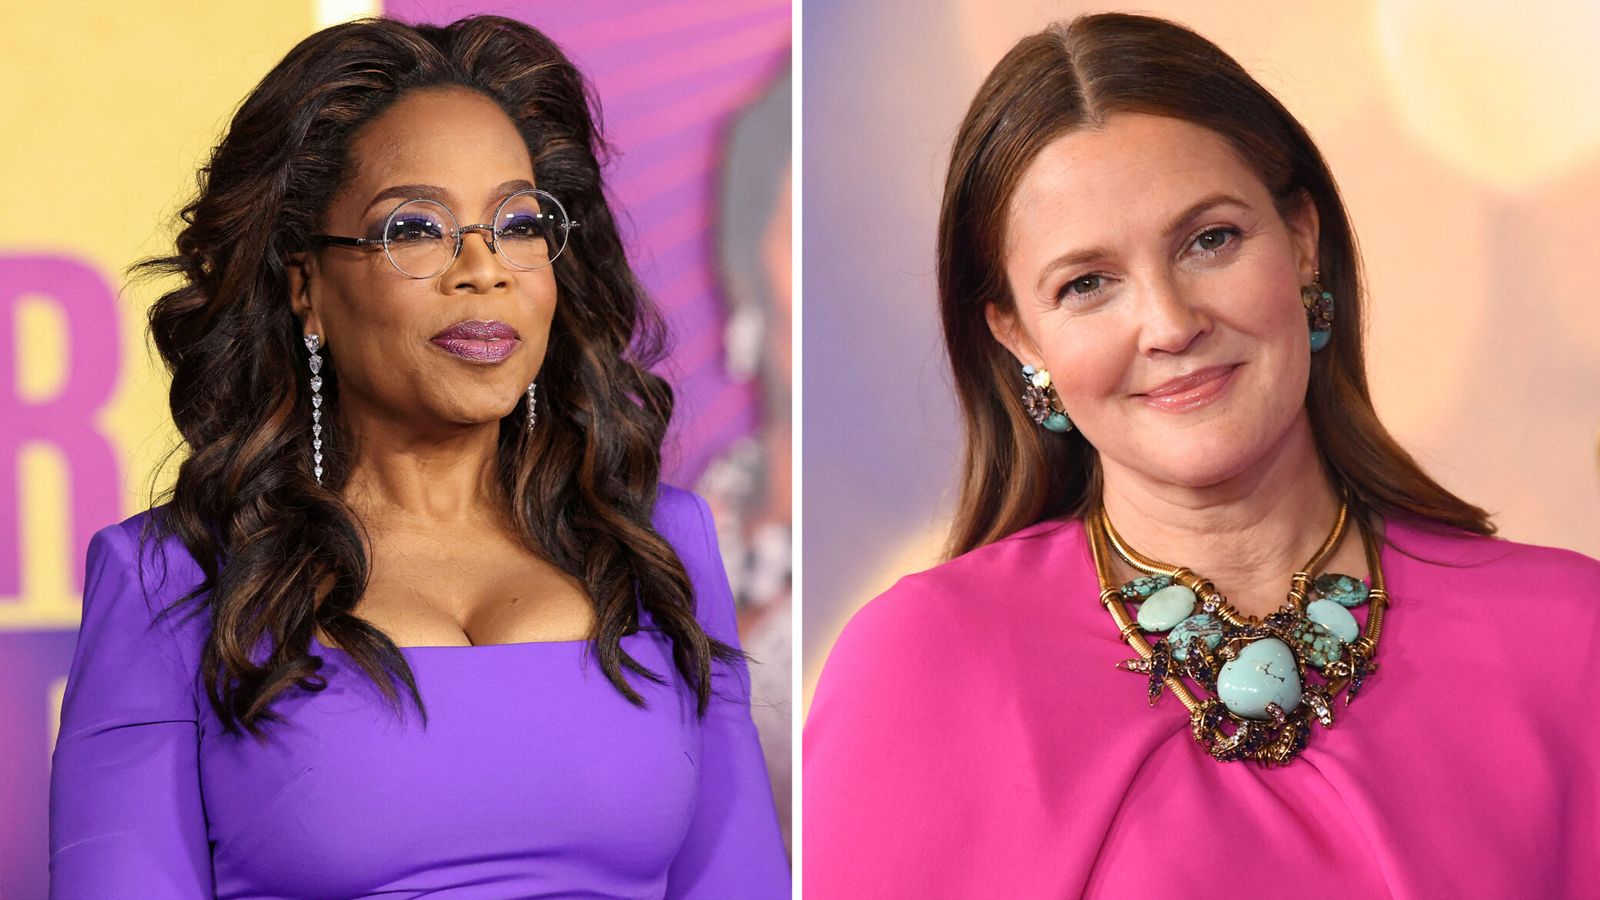 Oprah Winfrey says Drew Barrymore stroking her arm wasn't uncomfortable - it was 'endearing'